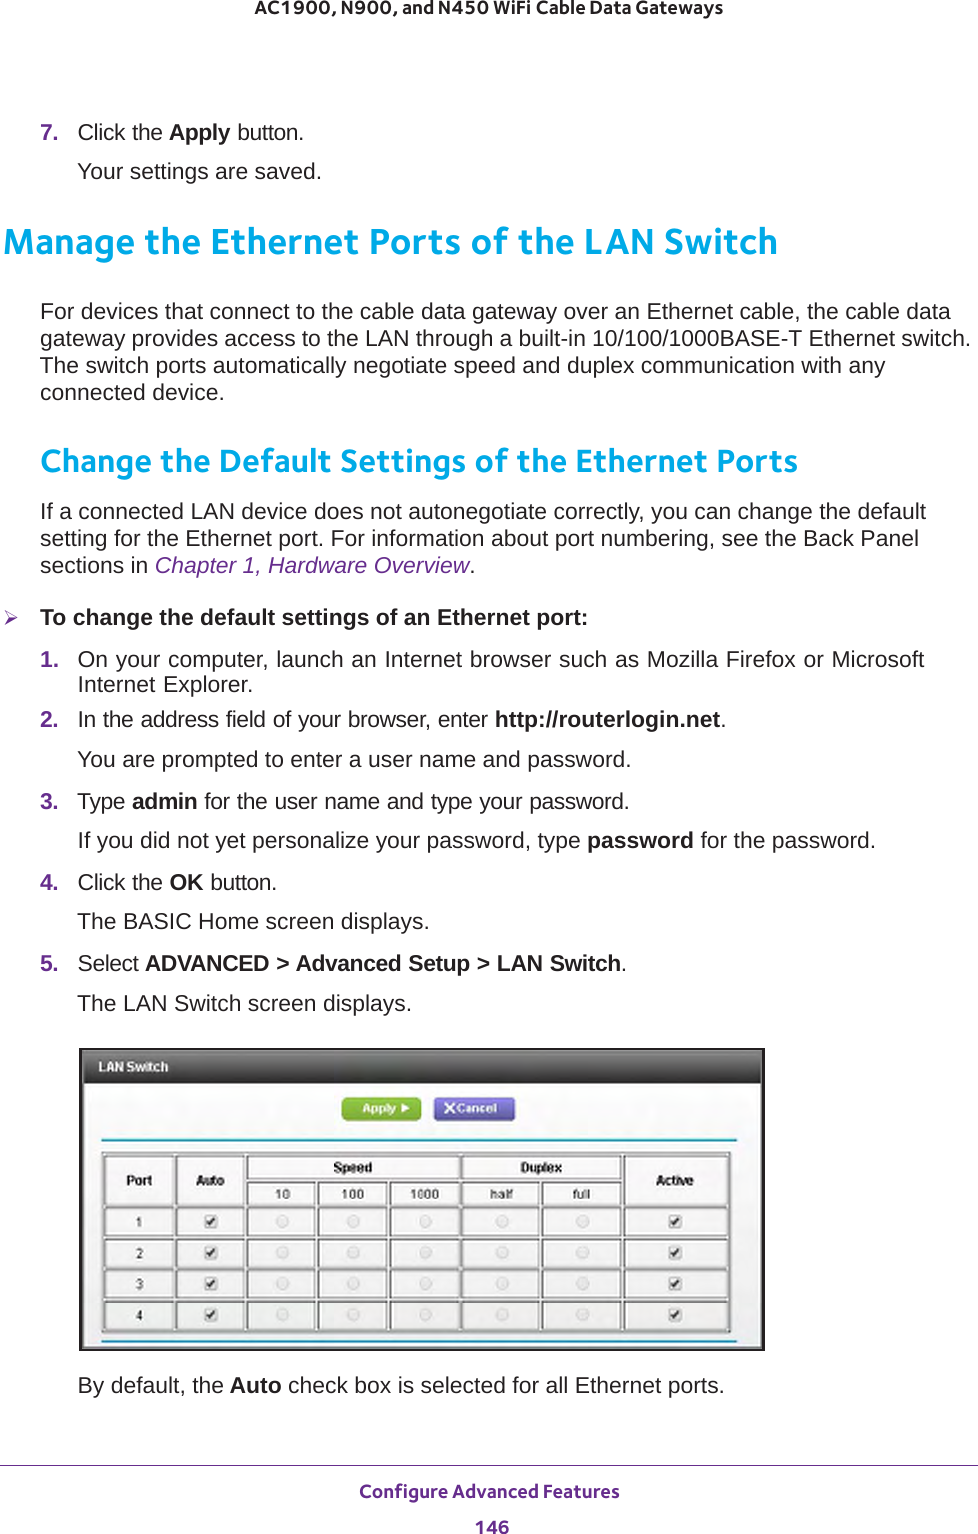 Configure Advanced Features 146AC1900, N900, and N450 WiFi Cable Data Gateways 7.  Click the Apply button.Your settings are saved.Manage the Ethernet Ports of the LAN SwitchFor devices that connect to the cable data gateway over an Ethernet cable, the cable data gateway provides access to the LAN through a built-in 10/100/1000BASE-T Ethernet switch. The switch ports automatically negotiate speed and duplex communication with any connected device. Change the Default Settings of the Ethernet PortsIf a connected LAN device does not autonegotiate correctly, you can change the default setting for the Ethernet port. For information about port numbering, see the Back Panel sections in Chapter 1, Hardware Overview.To change the default settings of an Ethernet port:1.  On your computer, launch an Internet browser such as Mozilla Firefox or Microsoft Internet Explorer. 2.  In the address field of your browser, enter http://routerlogin.net.You are prompted to enter a user name and password.3.  Type admin for the user name and type your password.If you did not yet personalize your password, type password for the password.4.  Click the OK button. The BASIC Home screen displays.5.  Select ADVANCED &gt; Advanced Setup &gt; LAN Switch.The LAN Switch screen displays.By default, the Auto check box is selected for all Ethernet ports.